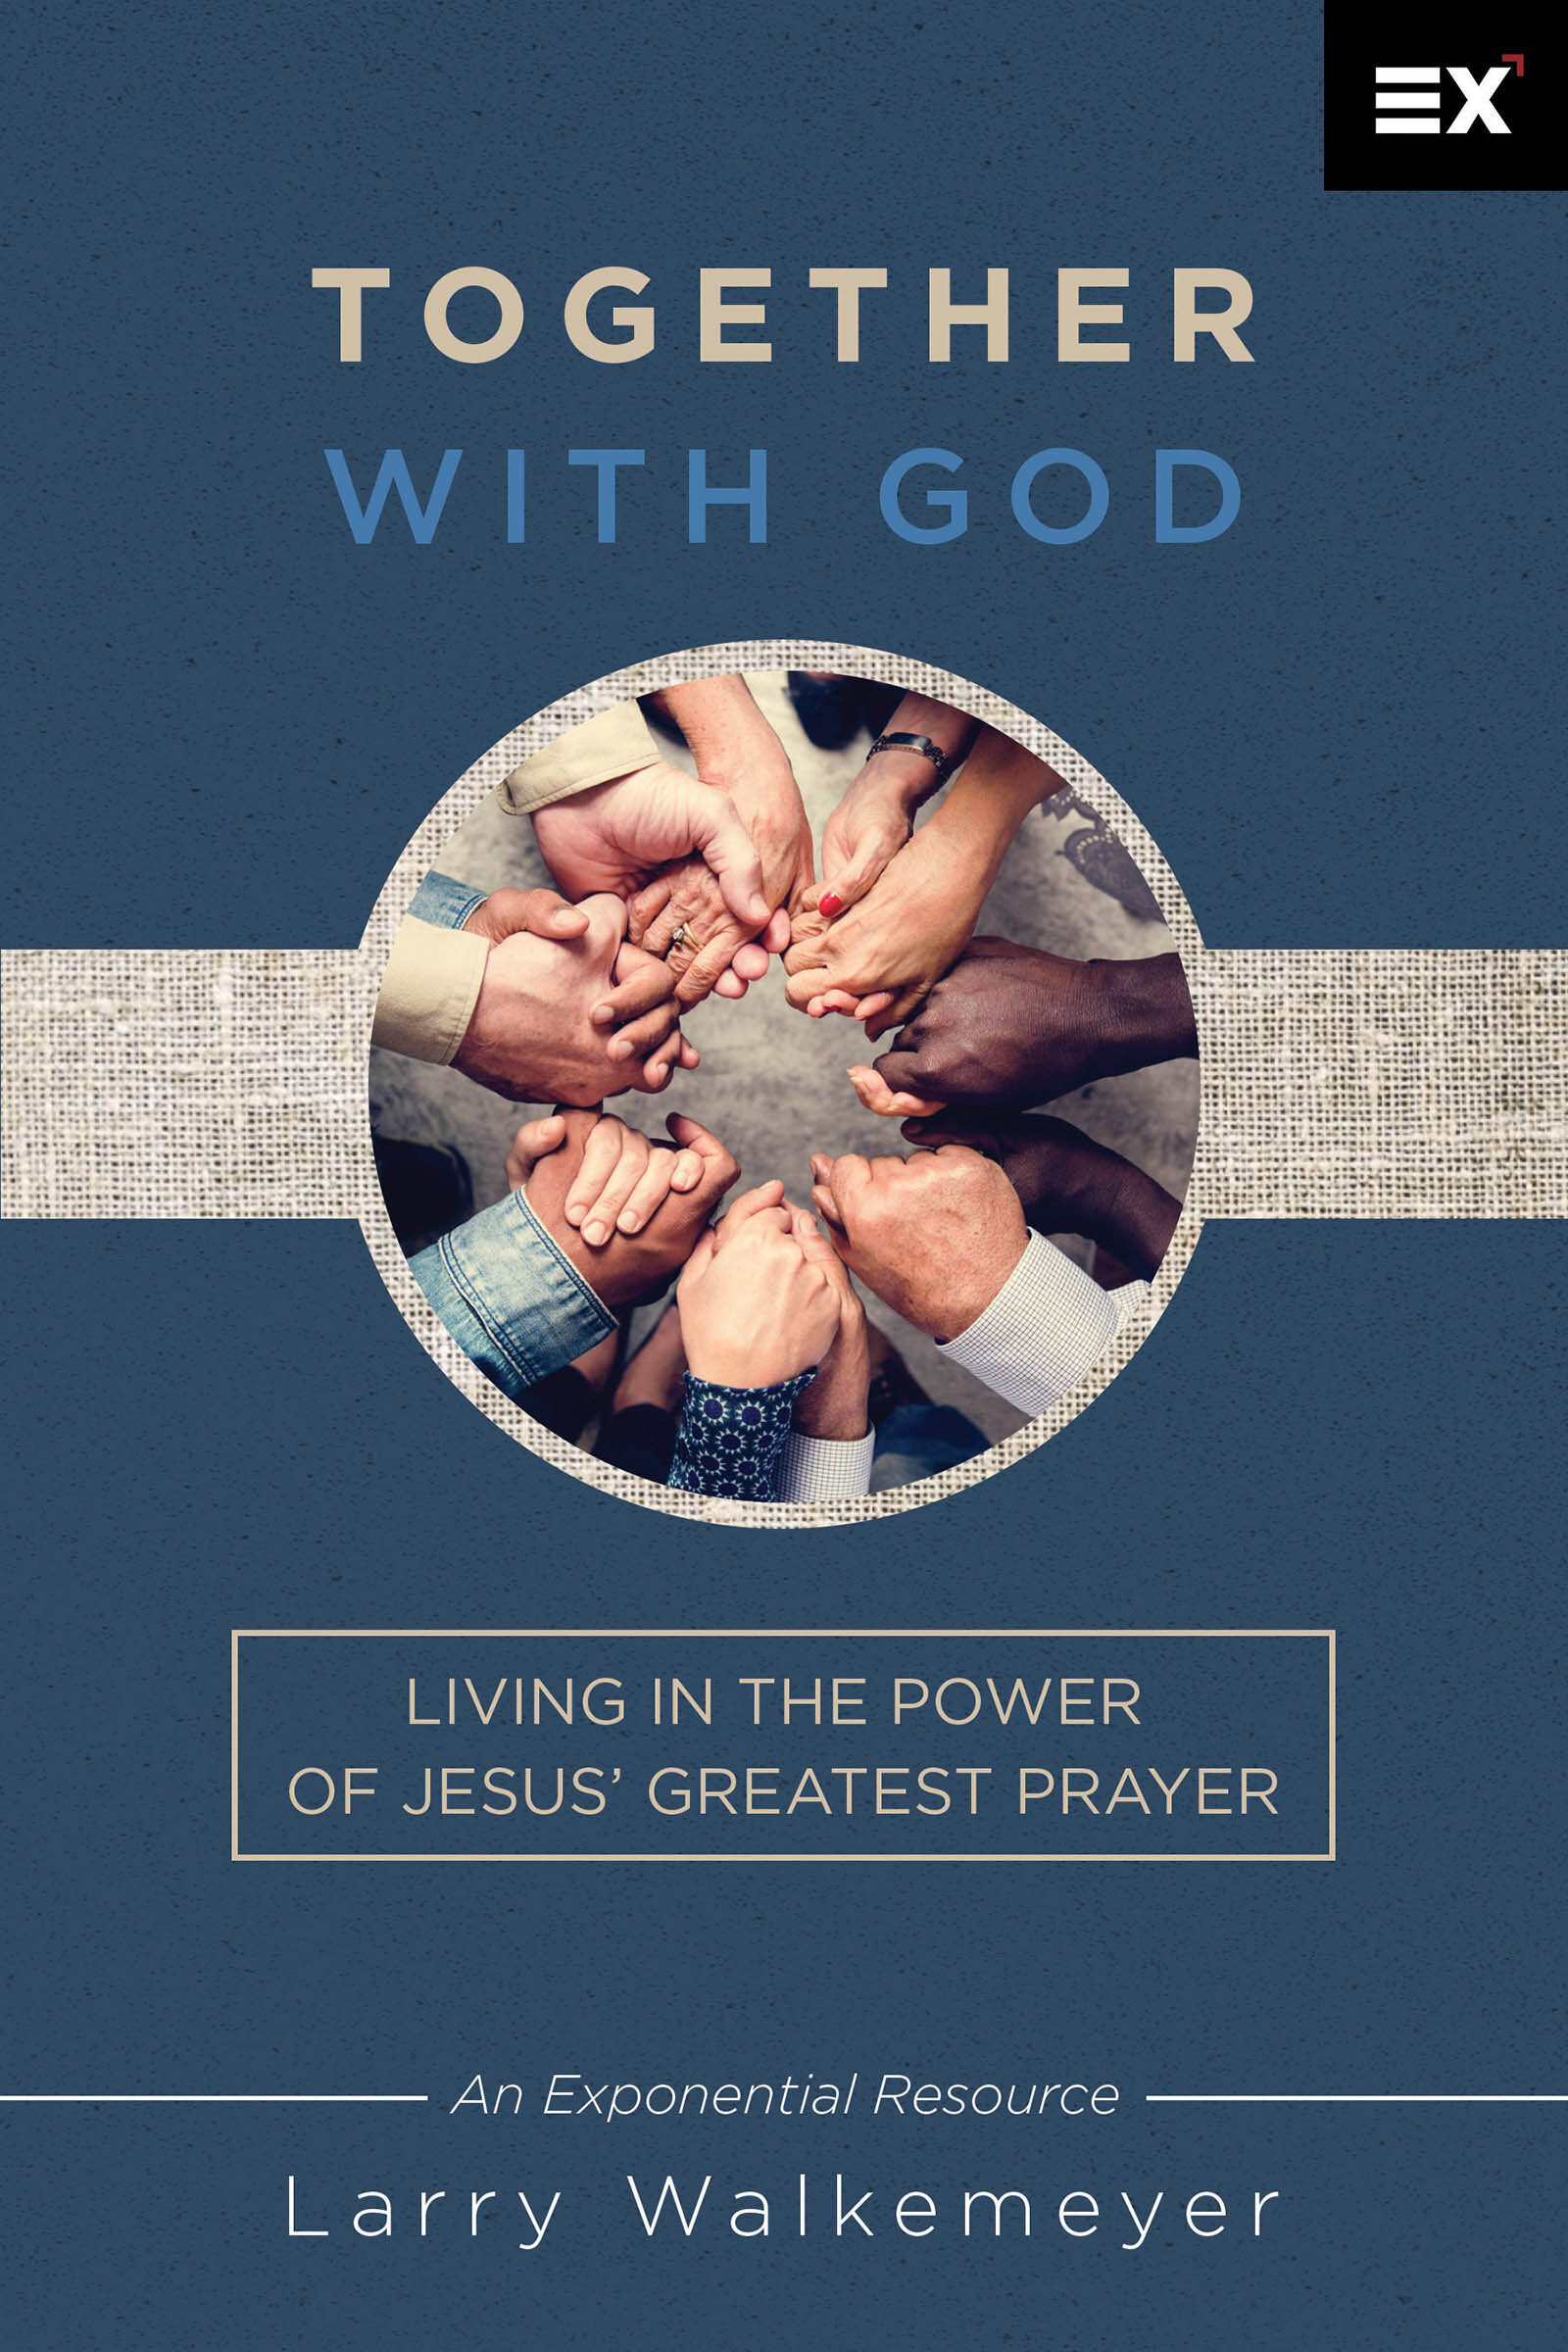 Together with God: Living in the Power of Jesus’ Greatest Prayer